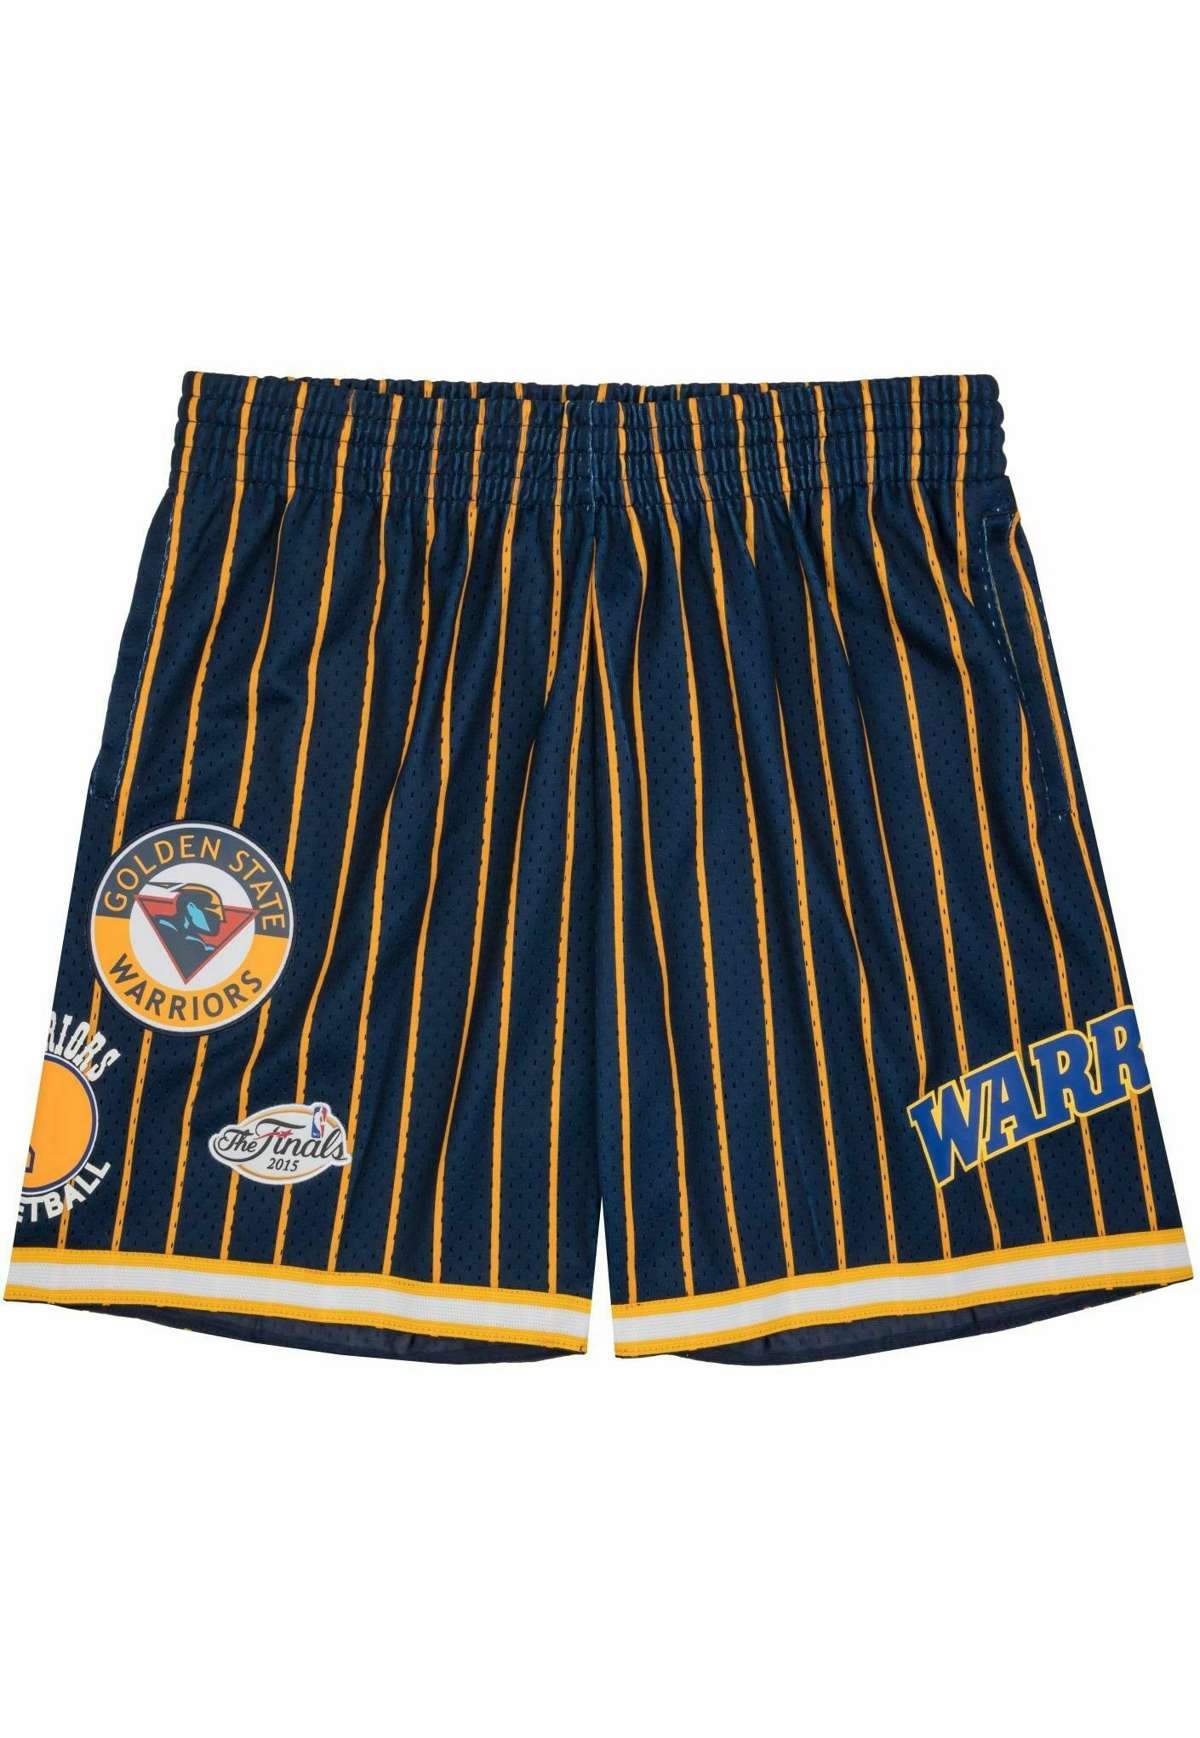 GOLDEN STATE WARRIORS CITY COLLECTION